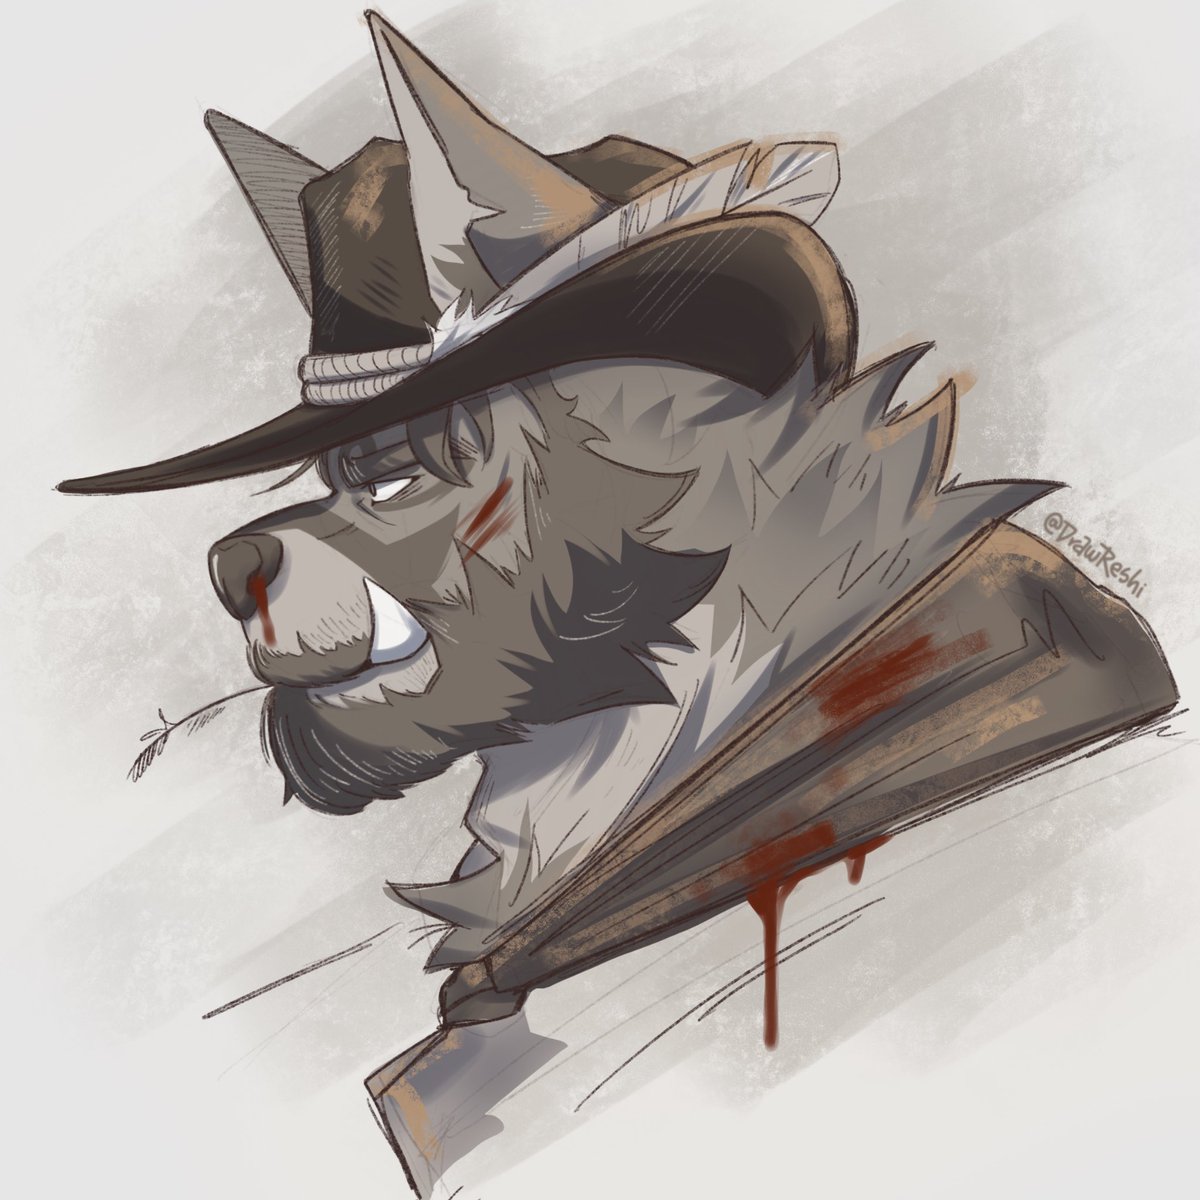 @Aluminemsiren You reminded me to make another cowboy reshi.